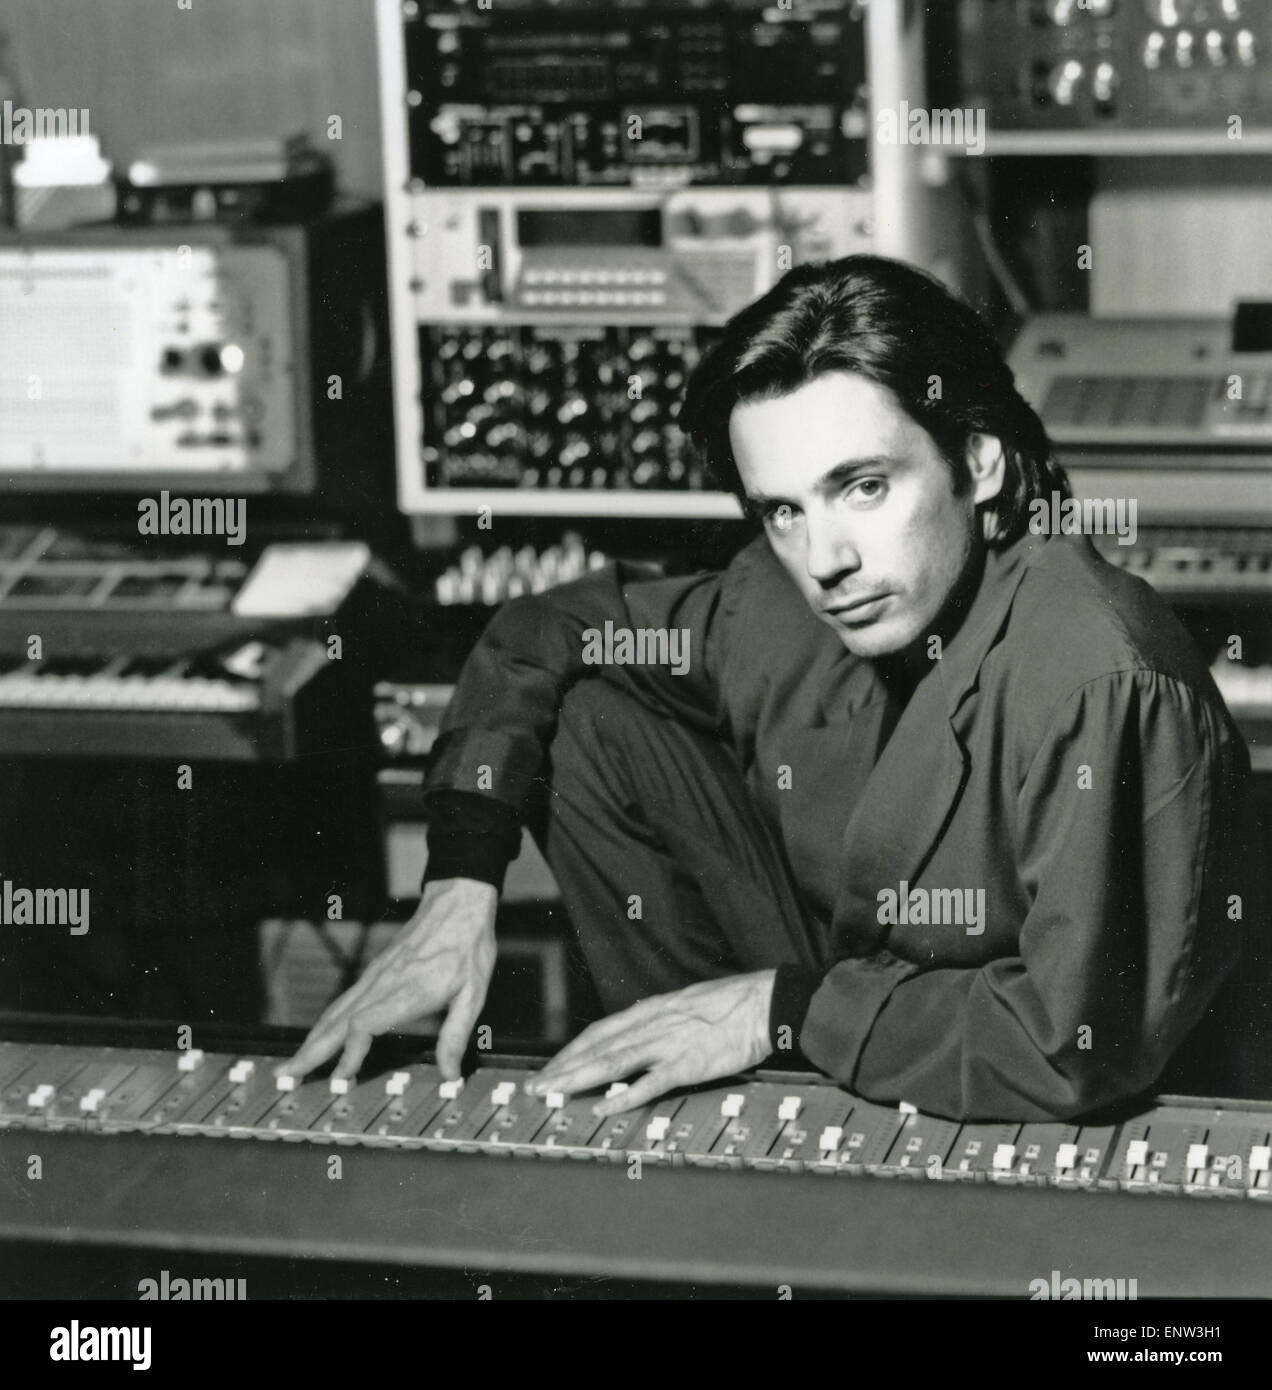 JEAN MICHEL JARRE  Promotional photo of French composer about 1993 Stock Photo